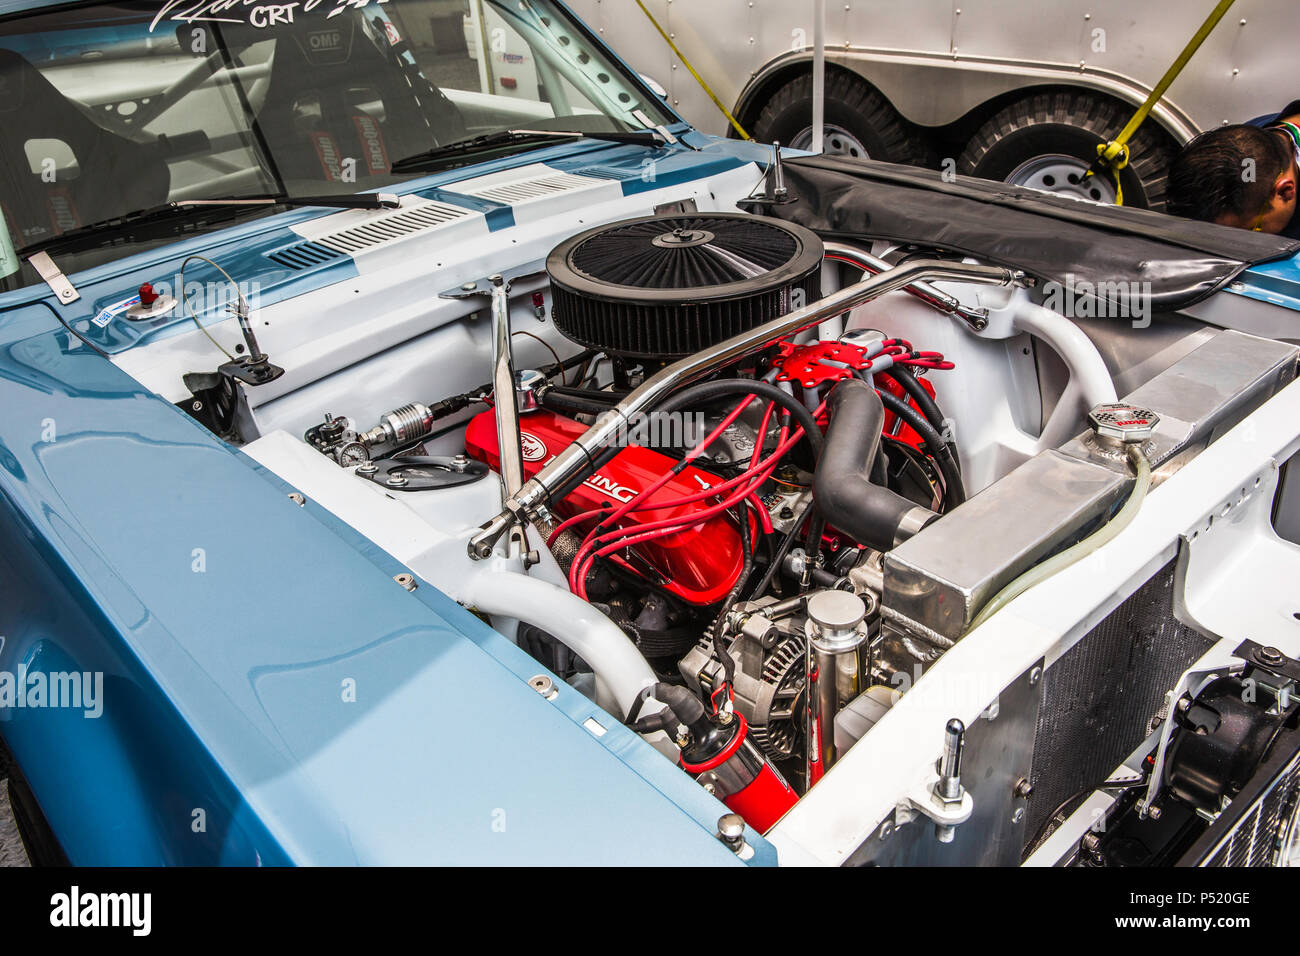 Mexico City, Mexico – September 01, 2017: Autodromo Hermanos Rodriguez. FIA World Endurance Championship WEC. 1967 Mustang Shelby GT500 engine from a participant from the Vintage Mexico Series Race. Stock Photo